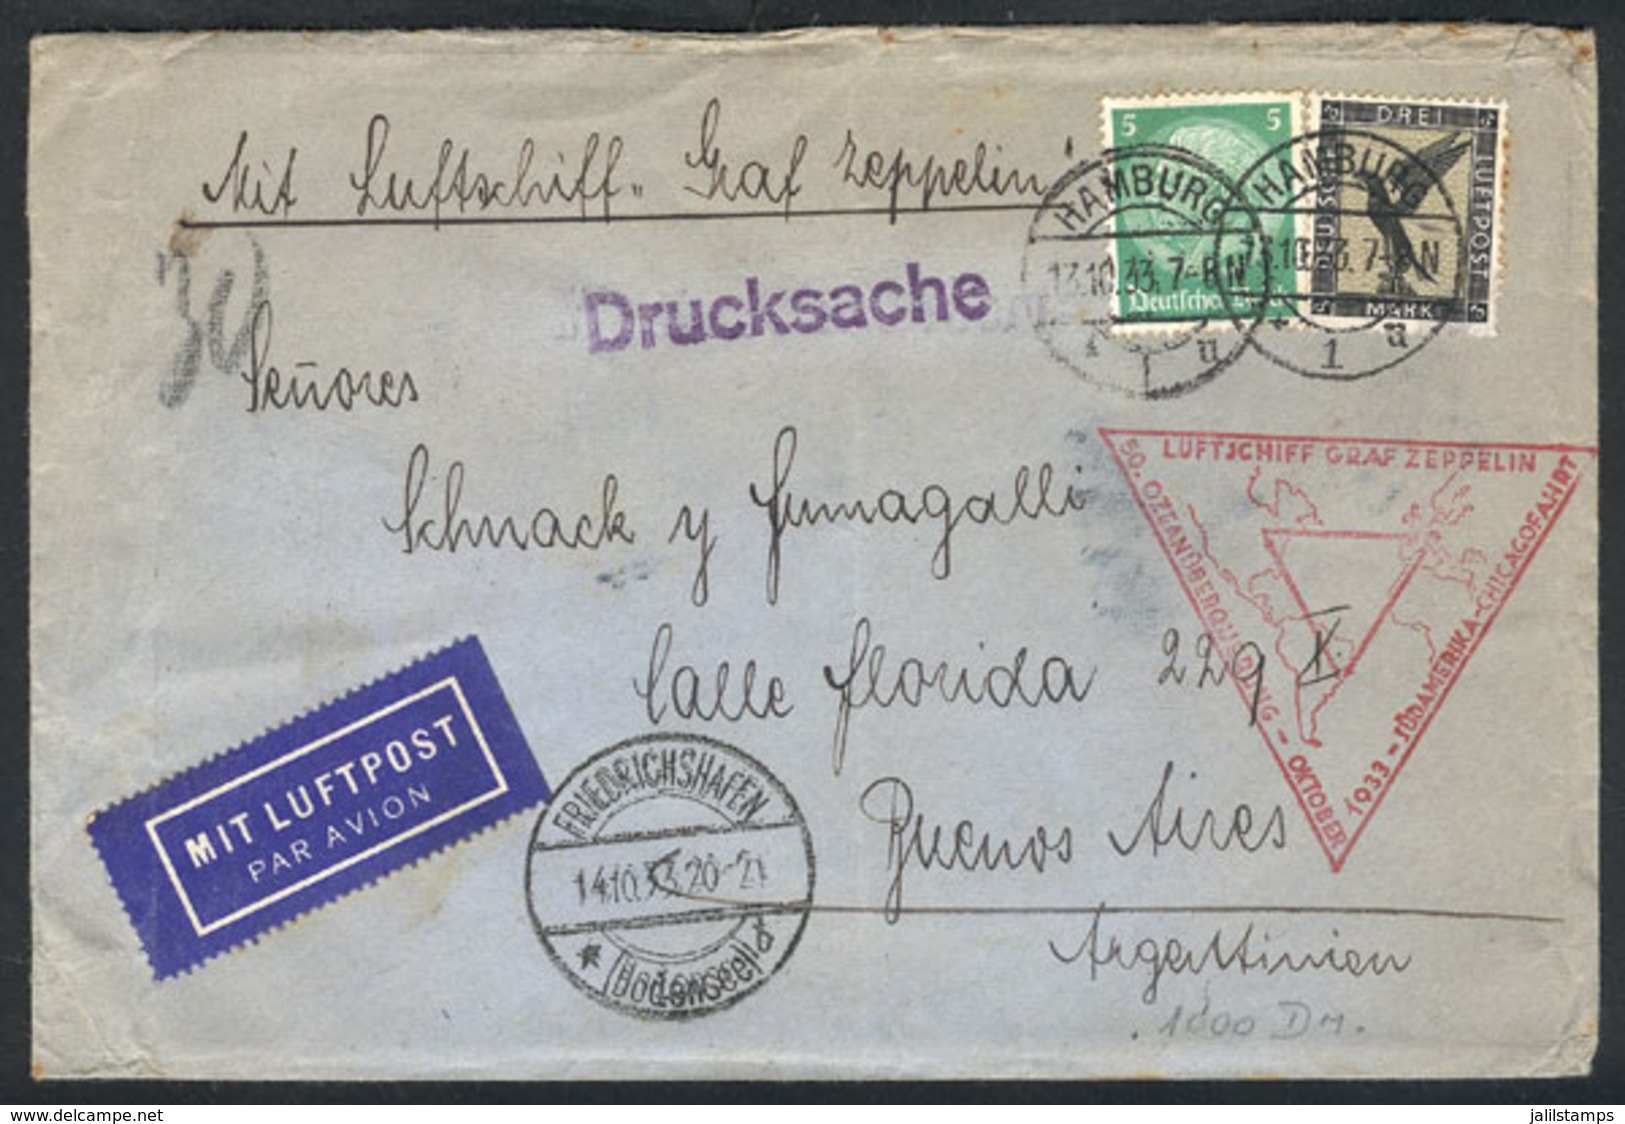 GERMANY: 13/OC/1933 Hamburg - Buenos Aires: Cover With PRINTED MATTER Flown By Zeppelin, Franked With 3.05Mk., With Tria - Vorphilatelie